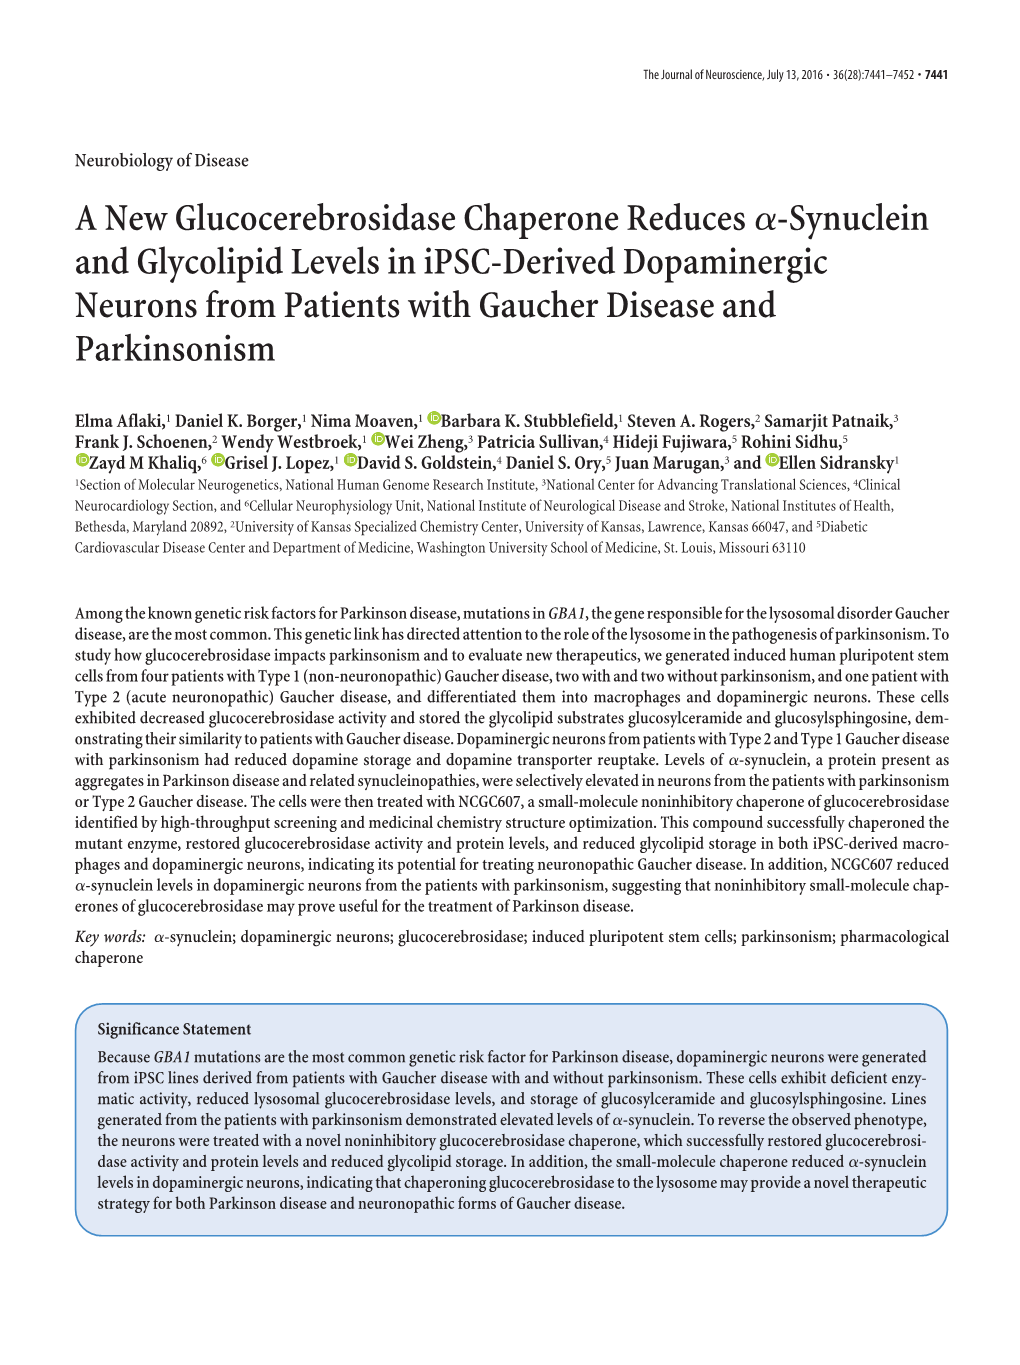 A New Glucocerebrosidase Chaperone Reduces Α-Synuclein and Glycolipid Levels in Ipsc-Derived Dopaminergic Neurons from Patients